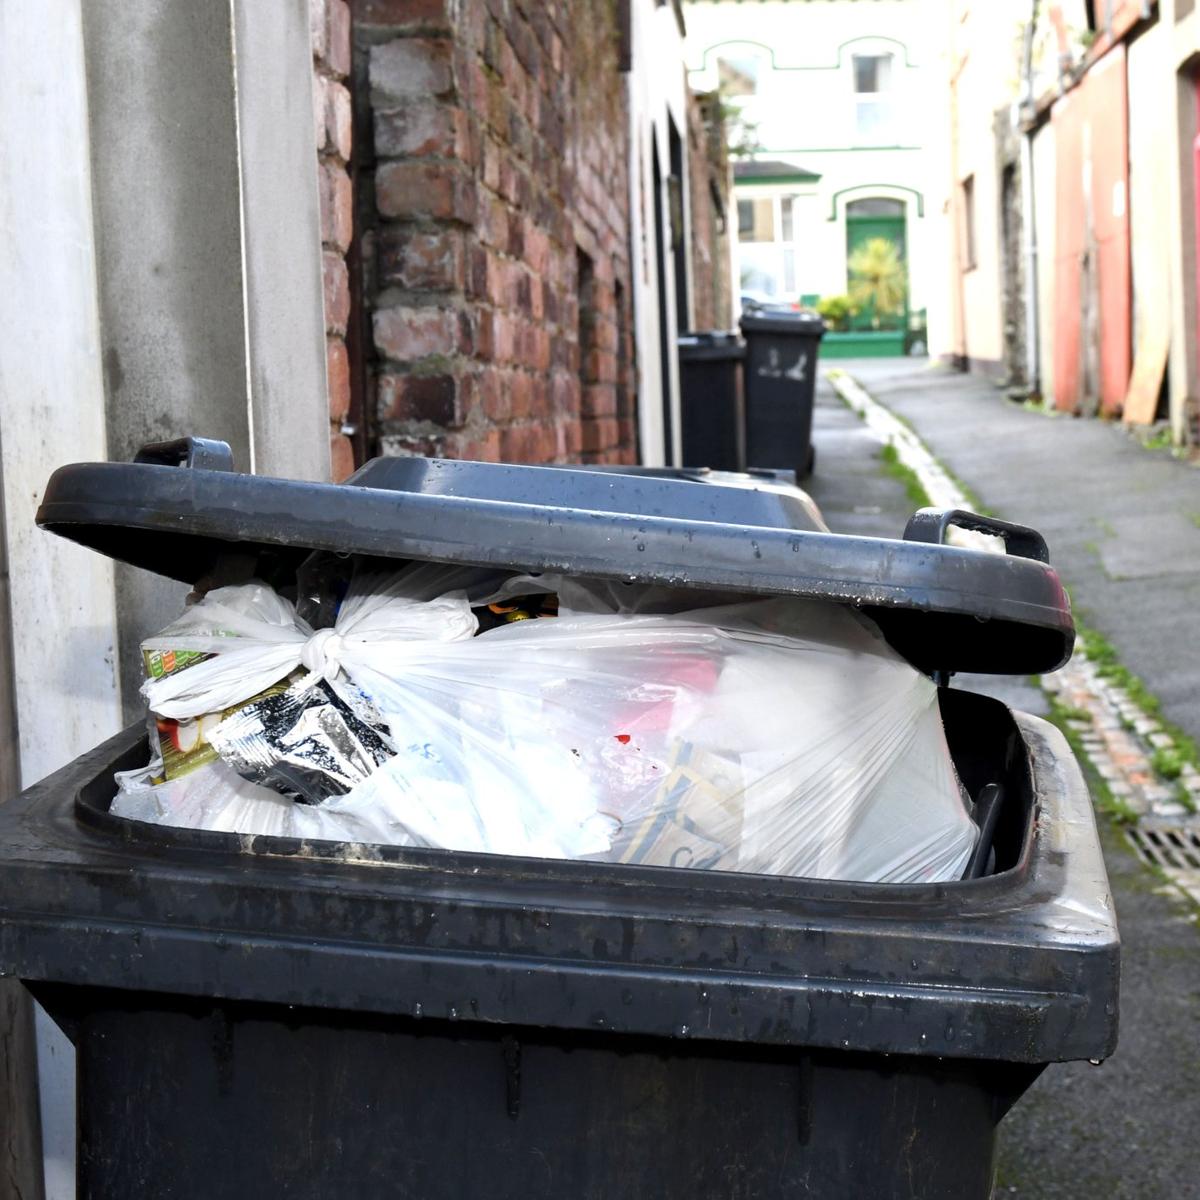 You are currently viewing Bin collections for Christmas across Teignbridge